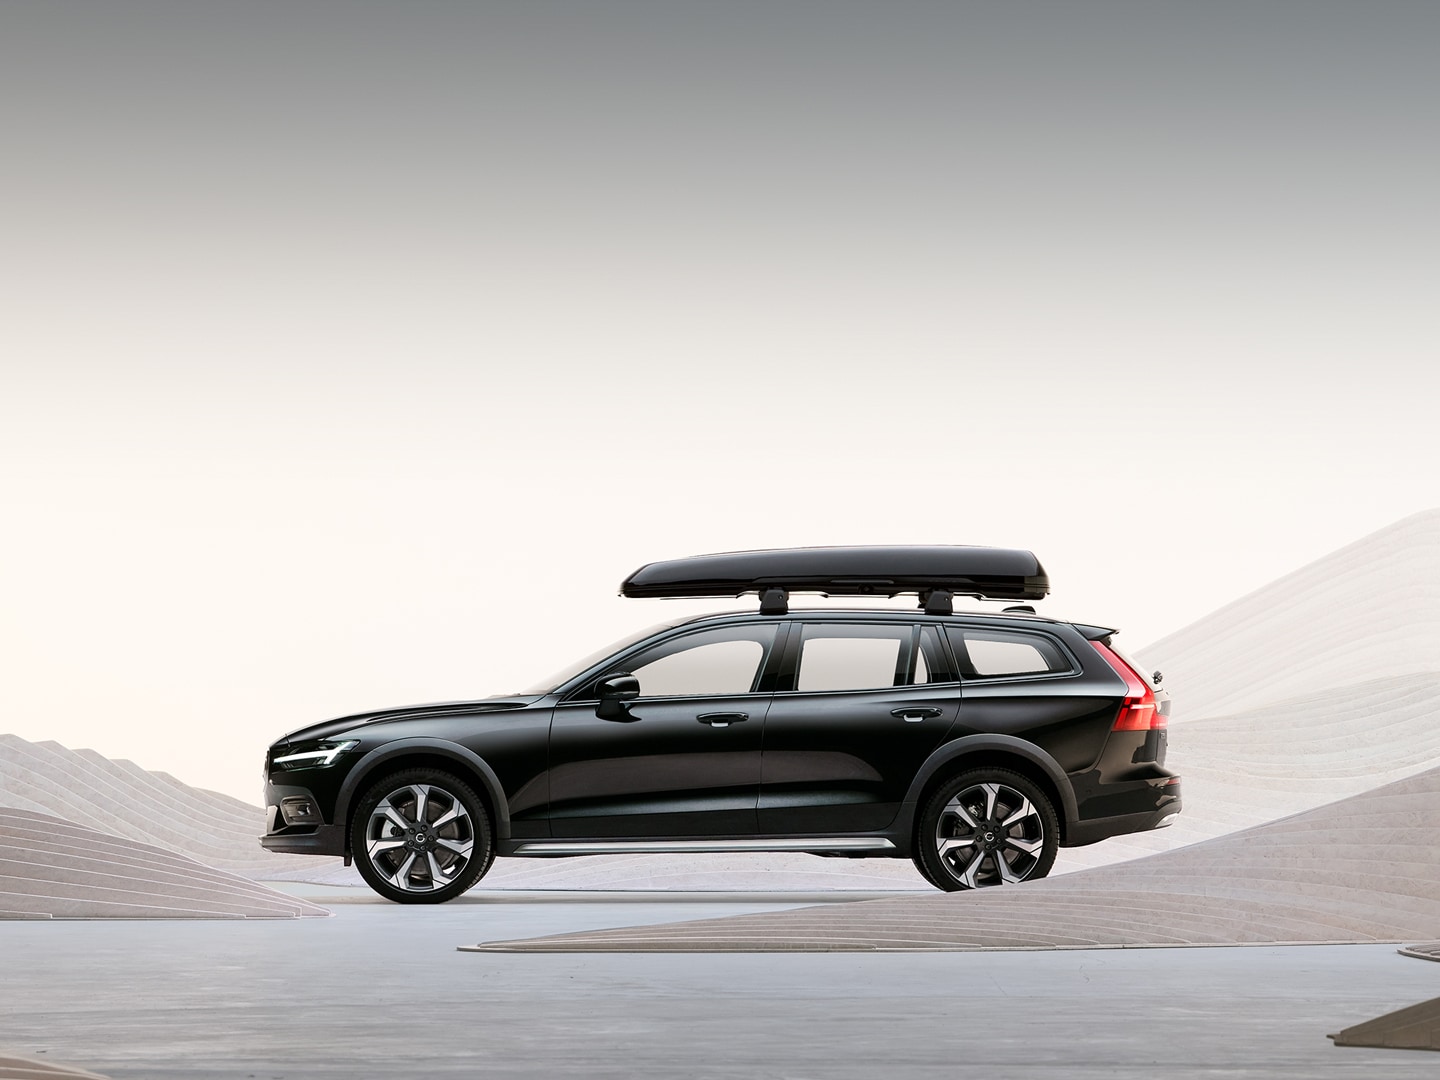 The side profile of a Volvo V60 Cross Country wagon with a roof box.